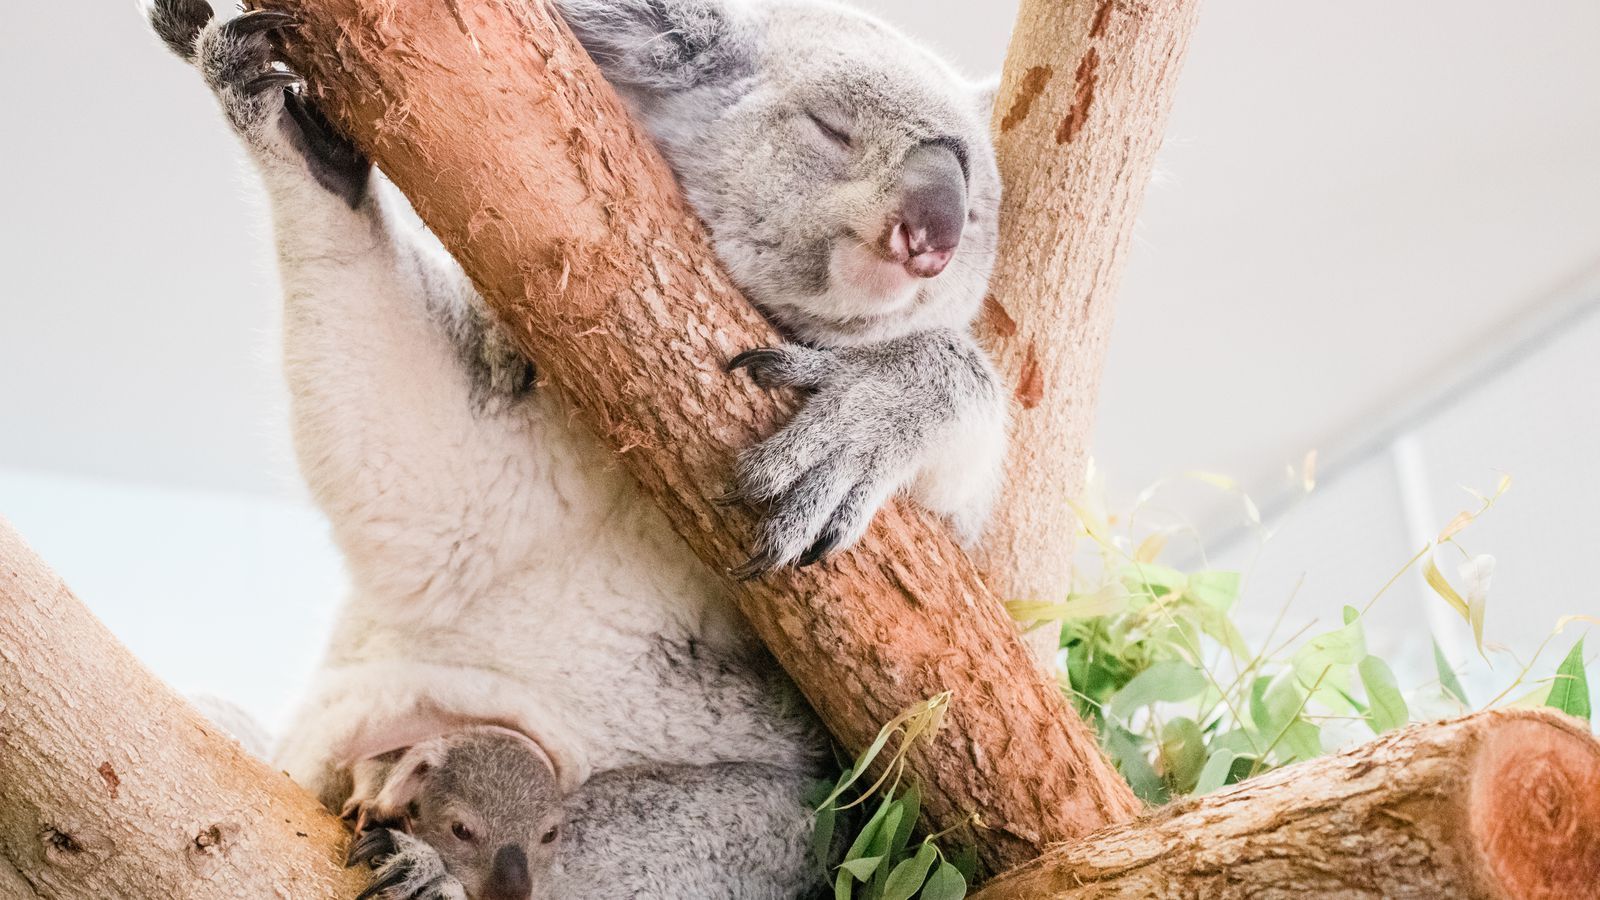 Look at these baby koala photo from ZooTampa